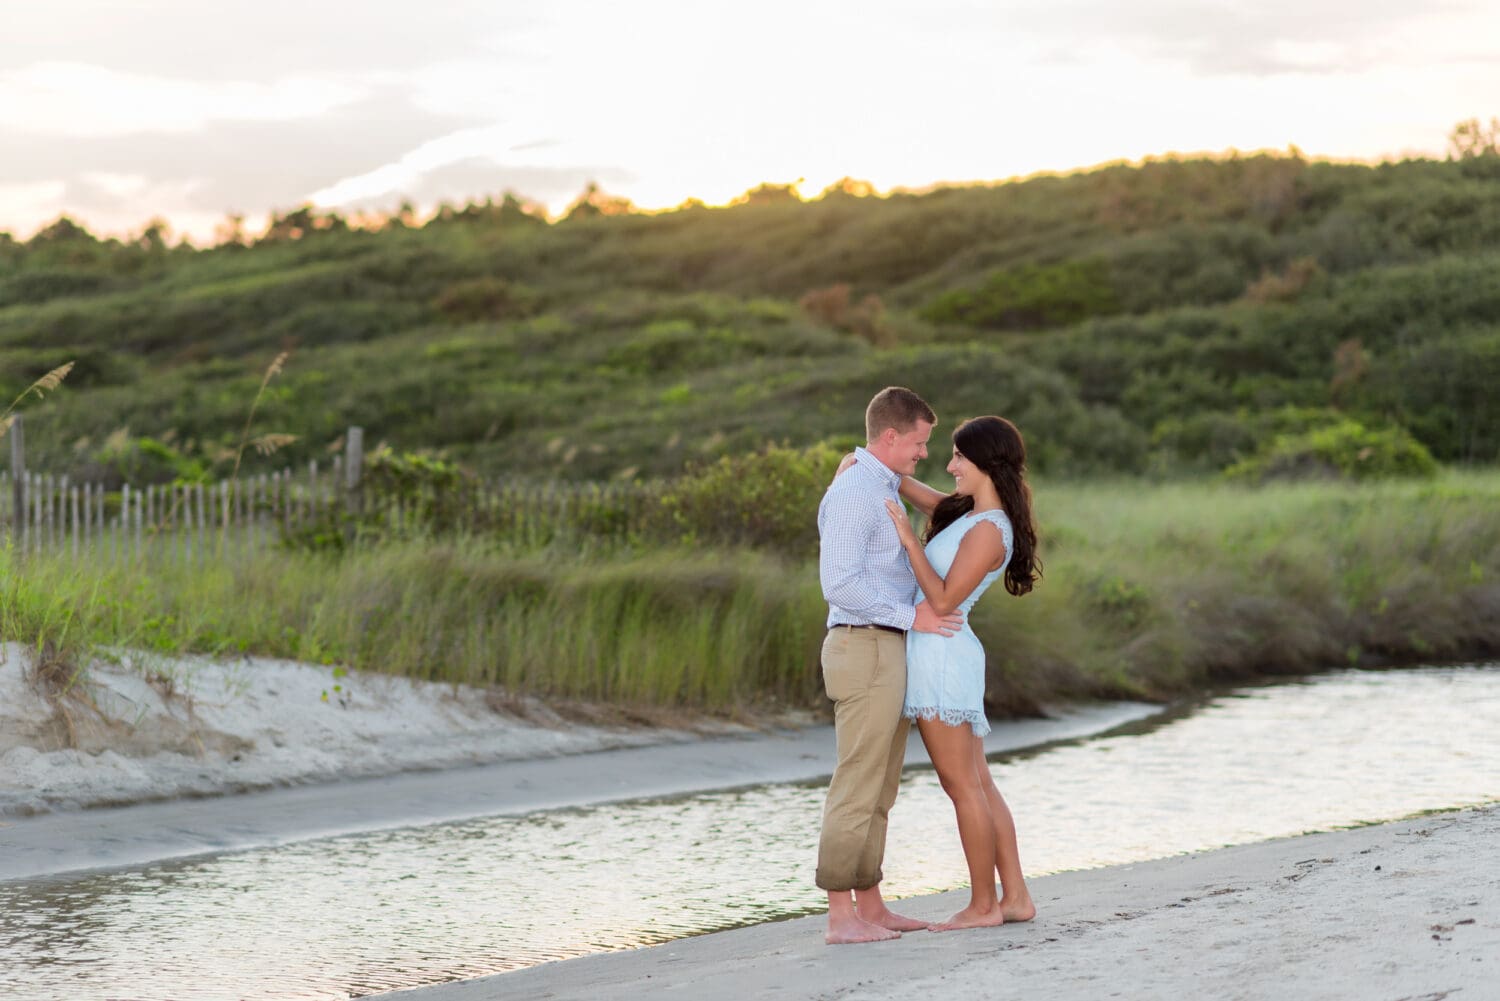 Couple smiling at each other in the sunset - Myrtle Beach State Park